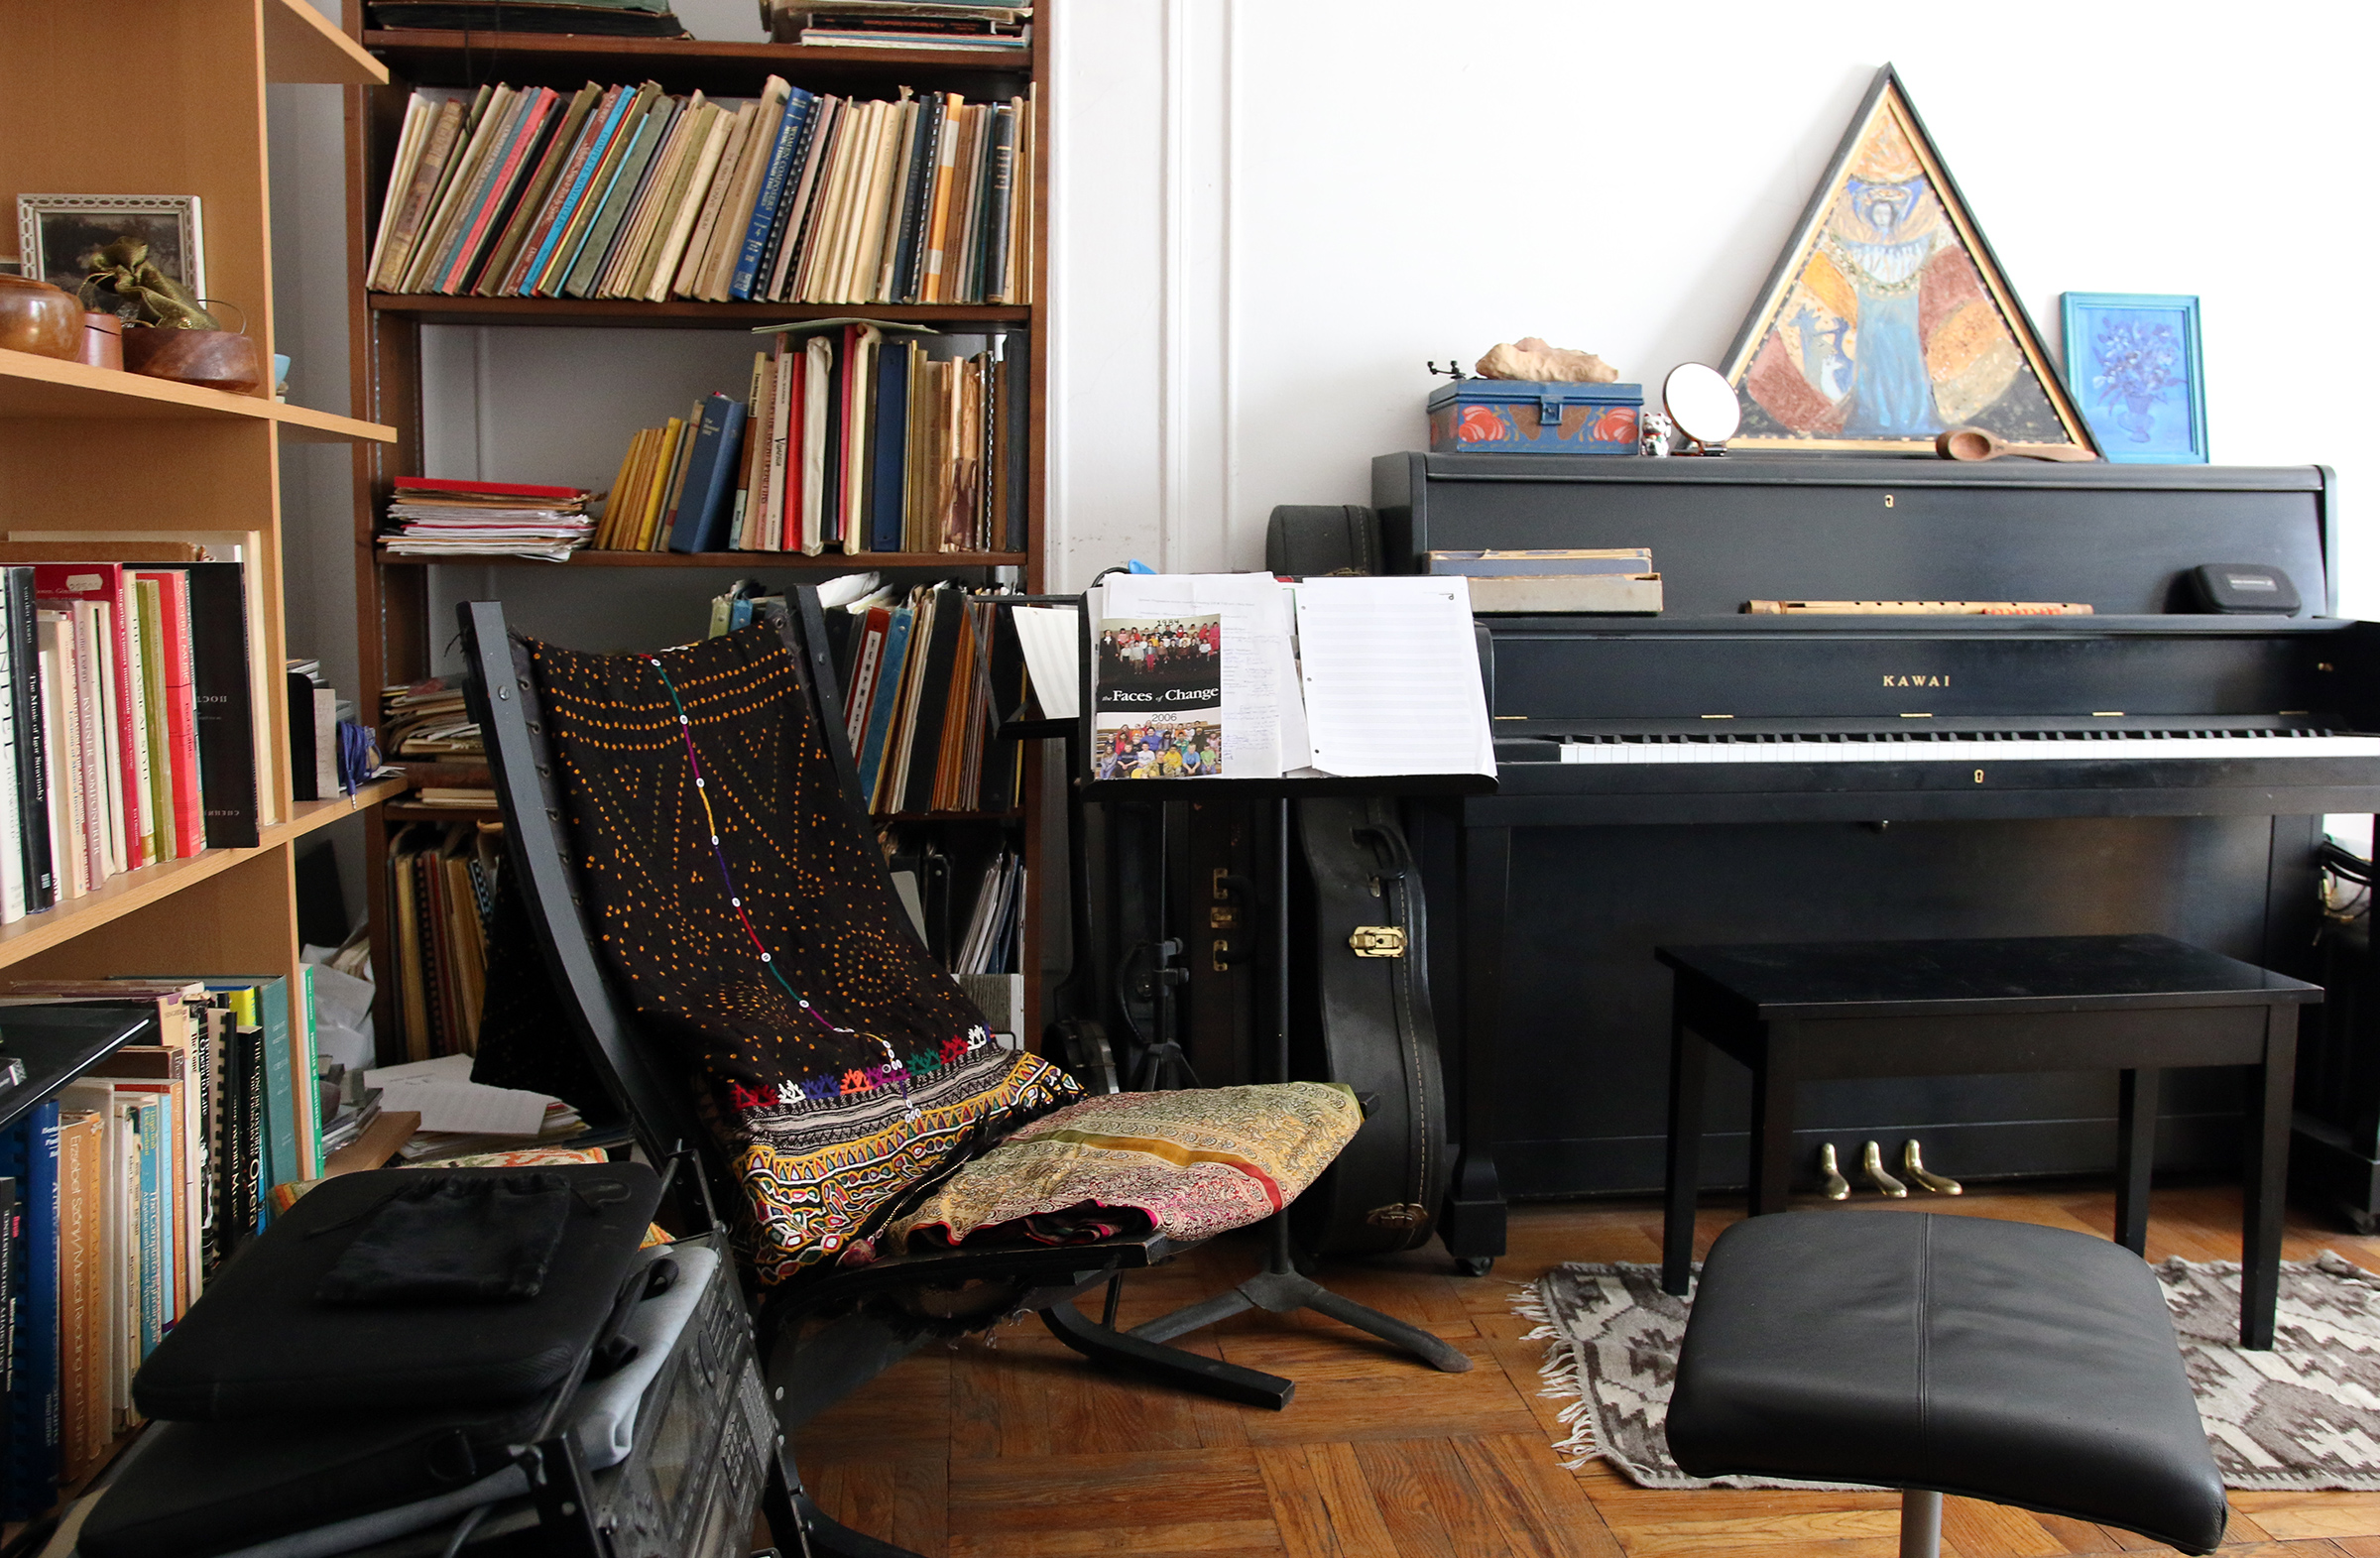 A room with shelves of books, a chair, and in the middle, an upright piano with a triangular painting on top of it.